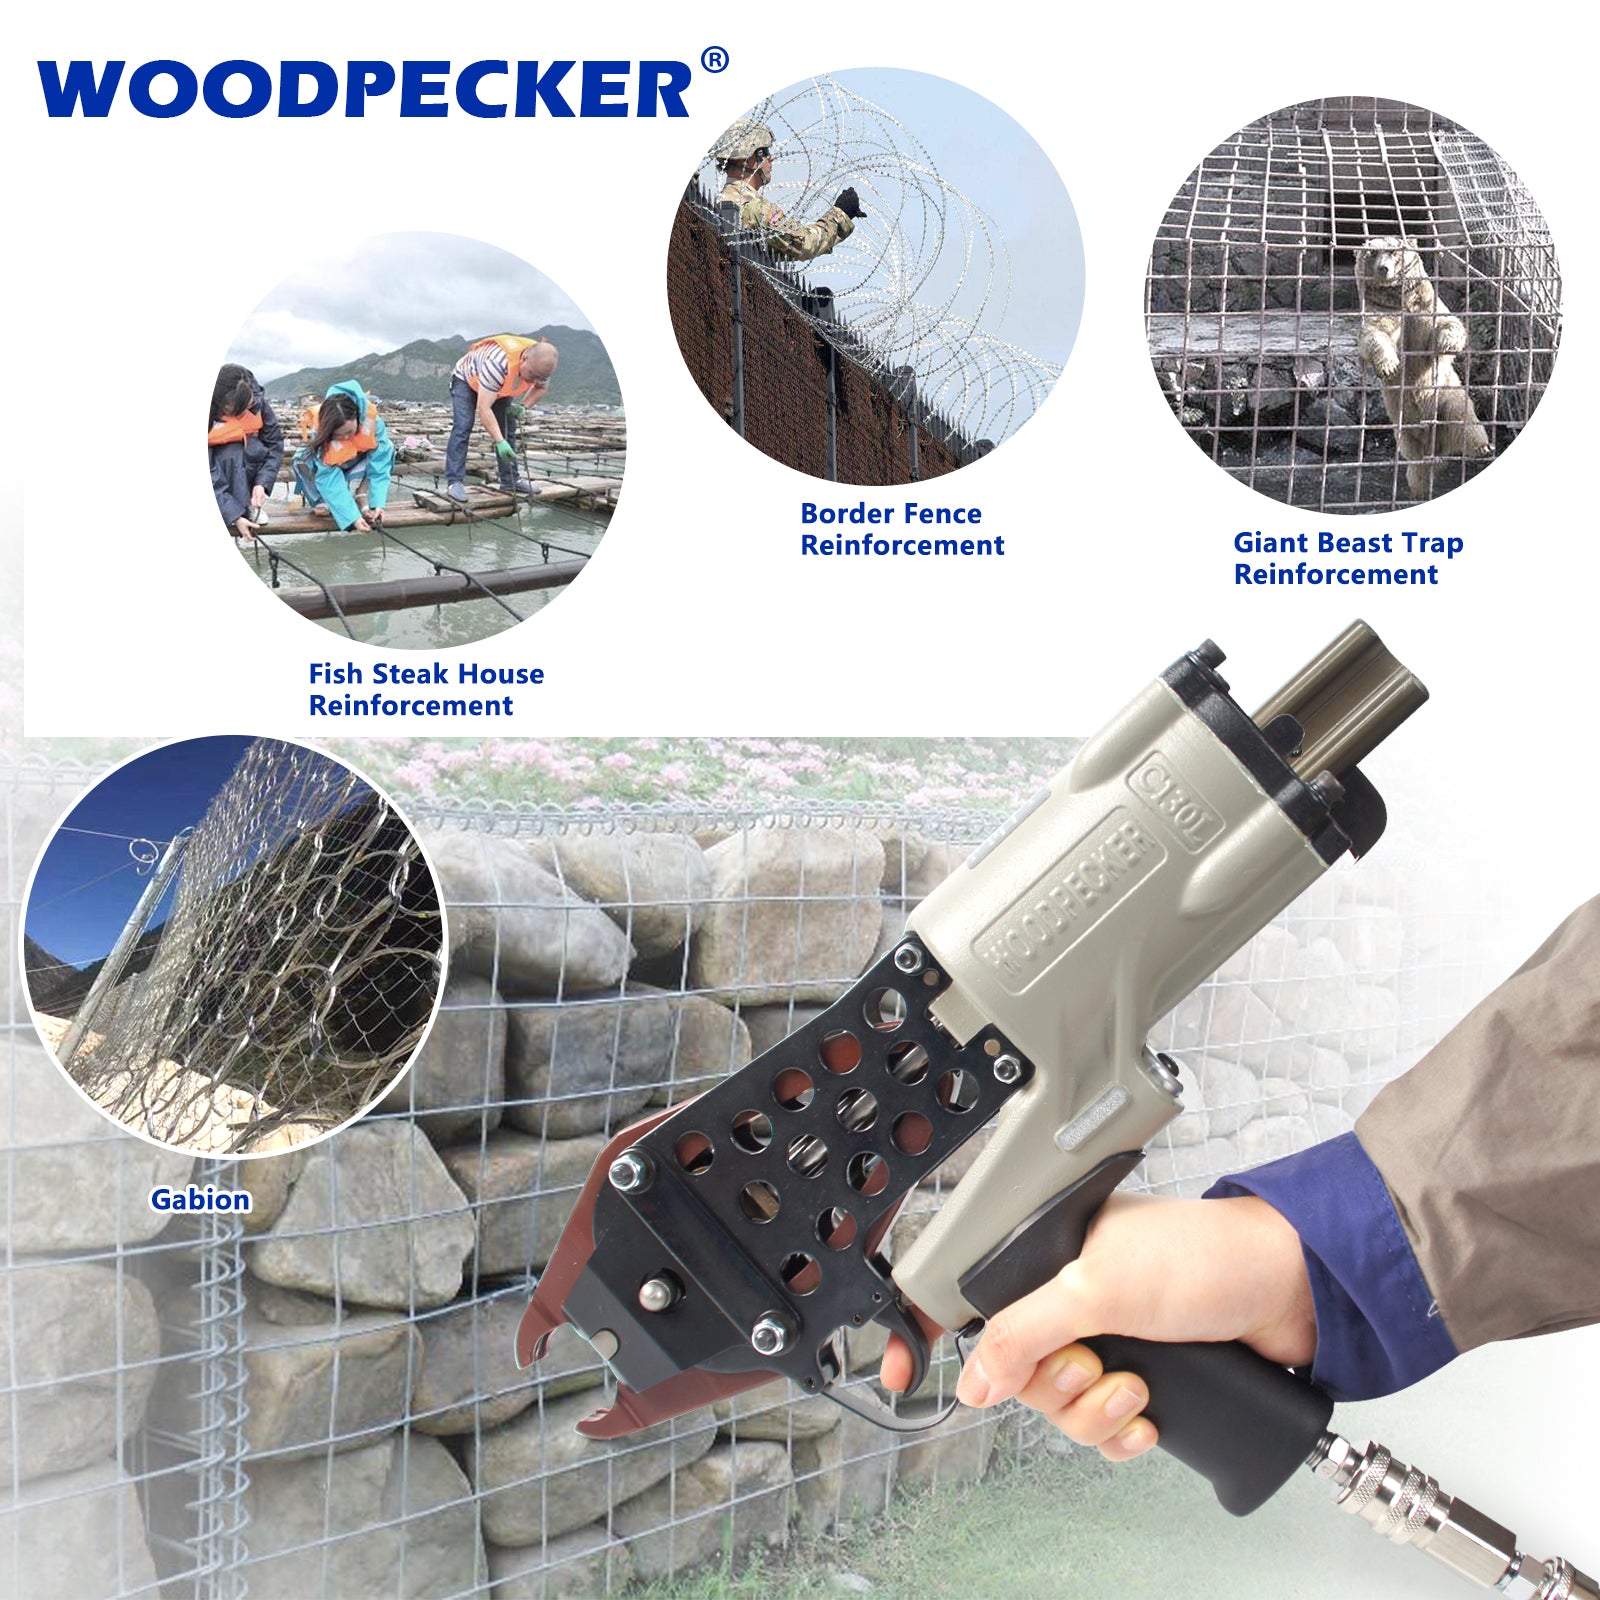 WOODPECKER C130L 11 Gauge Heavy-Duty Pneumatic Hog Ring Stapler, 13-14mm Closure Diameter, 1 1/2-Inch Crown, Lightweight and Powerful C Ring Gun for Border Fencing, Gabion, and Cages Building